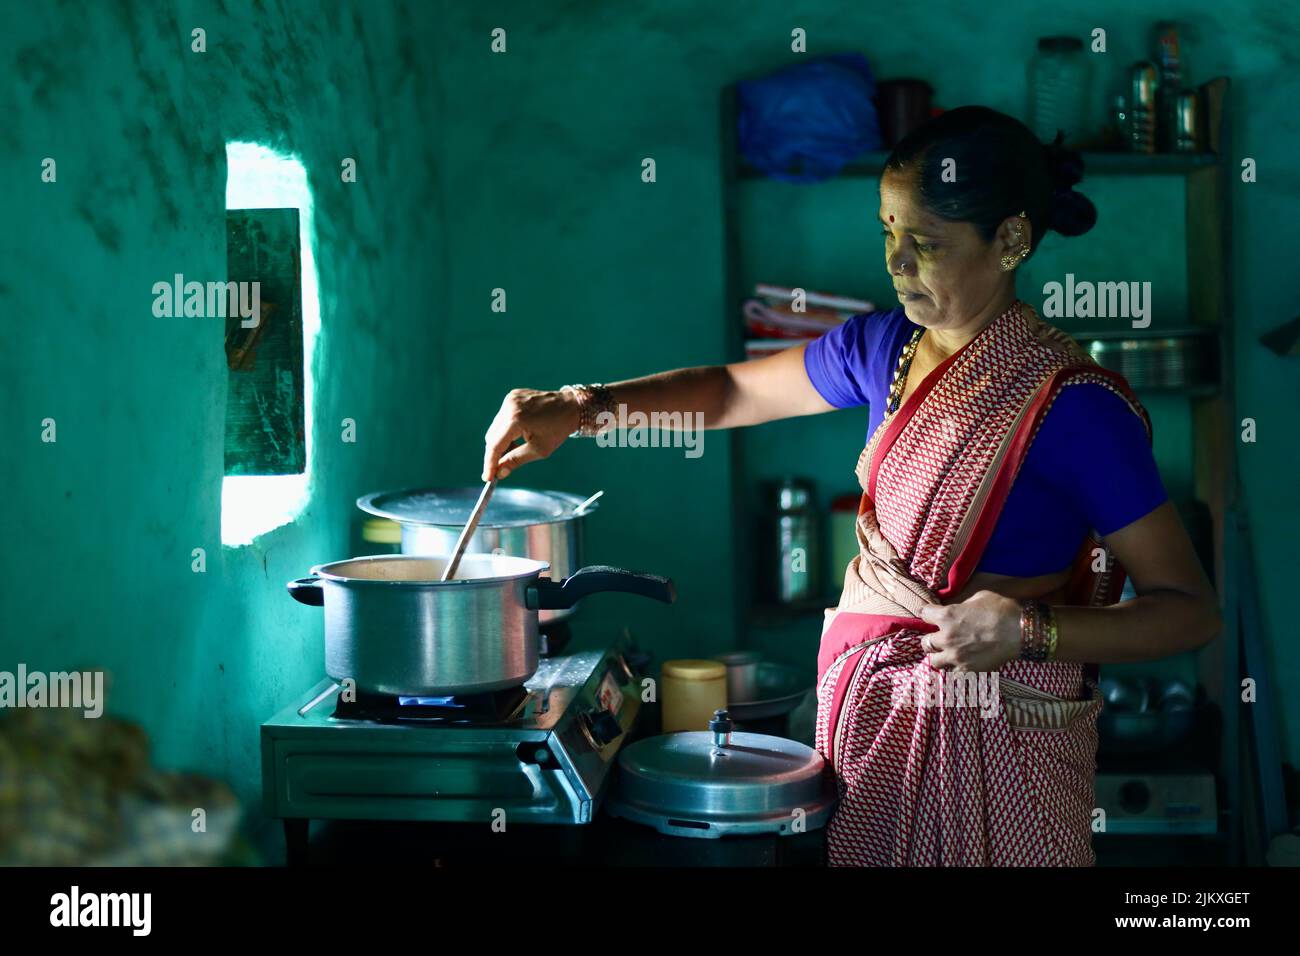 A Selective Focus Of An Indian Woman Cooking In A Kitchen 2JKXGET 